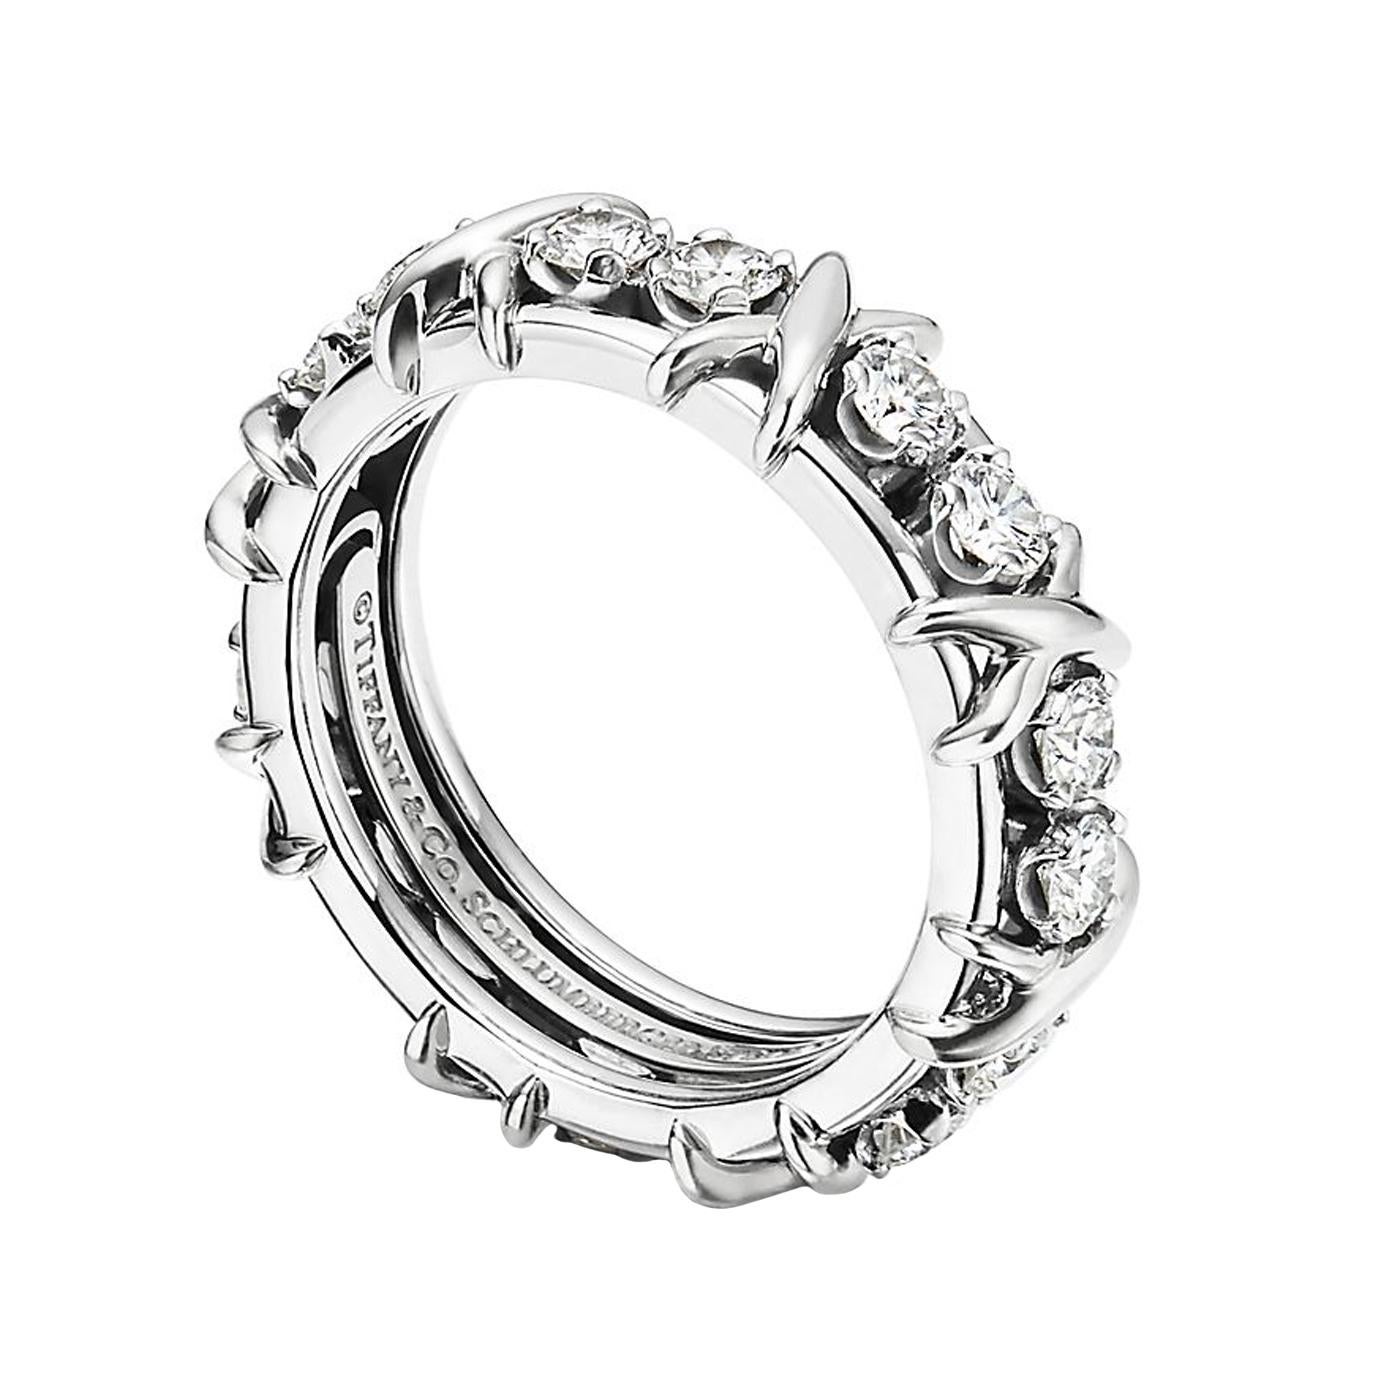 Jean Schlumberger’s visionary creations are among the world’s most intricate designs. Brilliant diamonds alternate with platinum X's to create this dazzling design. 

Details:
Brand: Tiffany & Co.
Series: Schlumberger Sixteen Stone
Total Carat